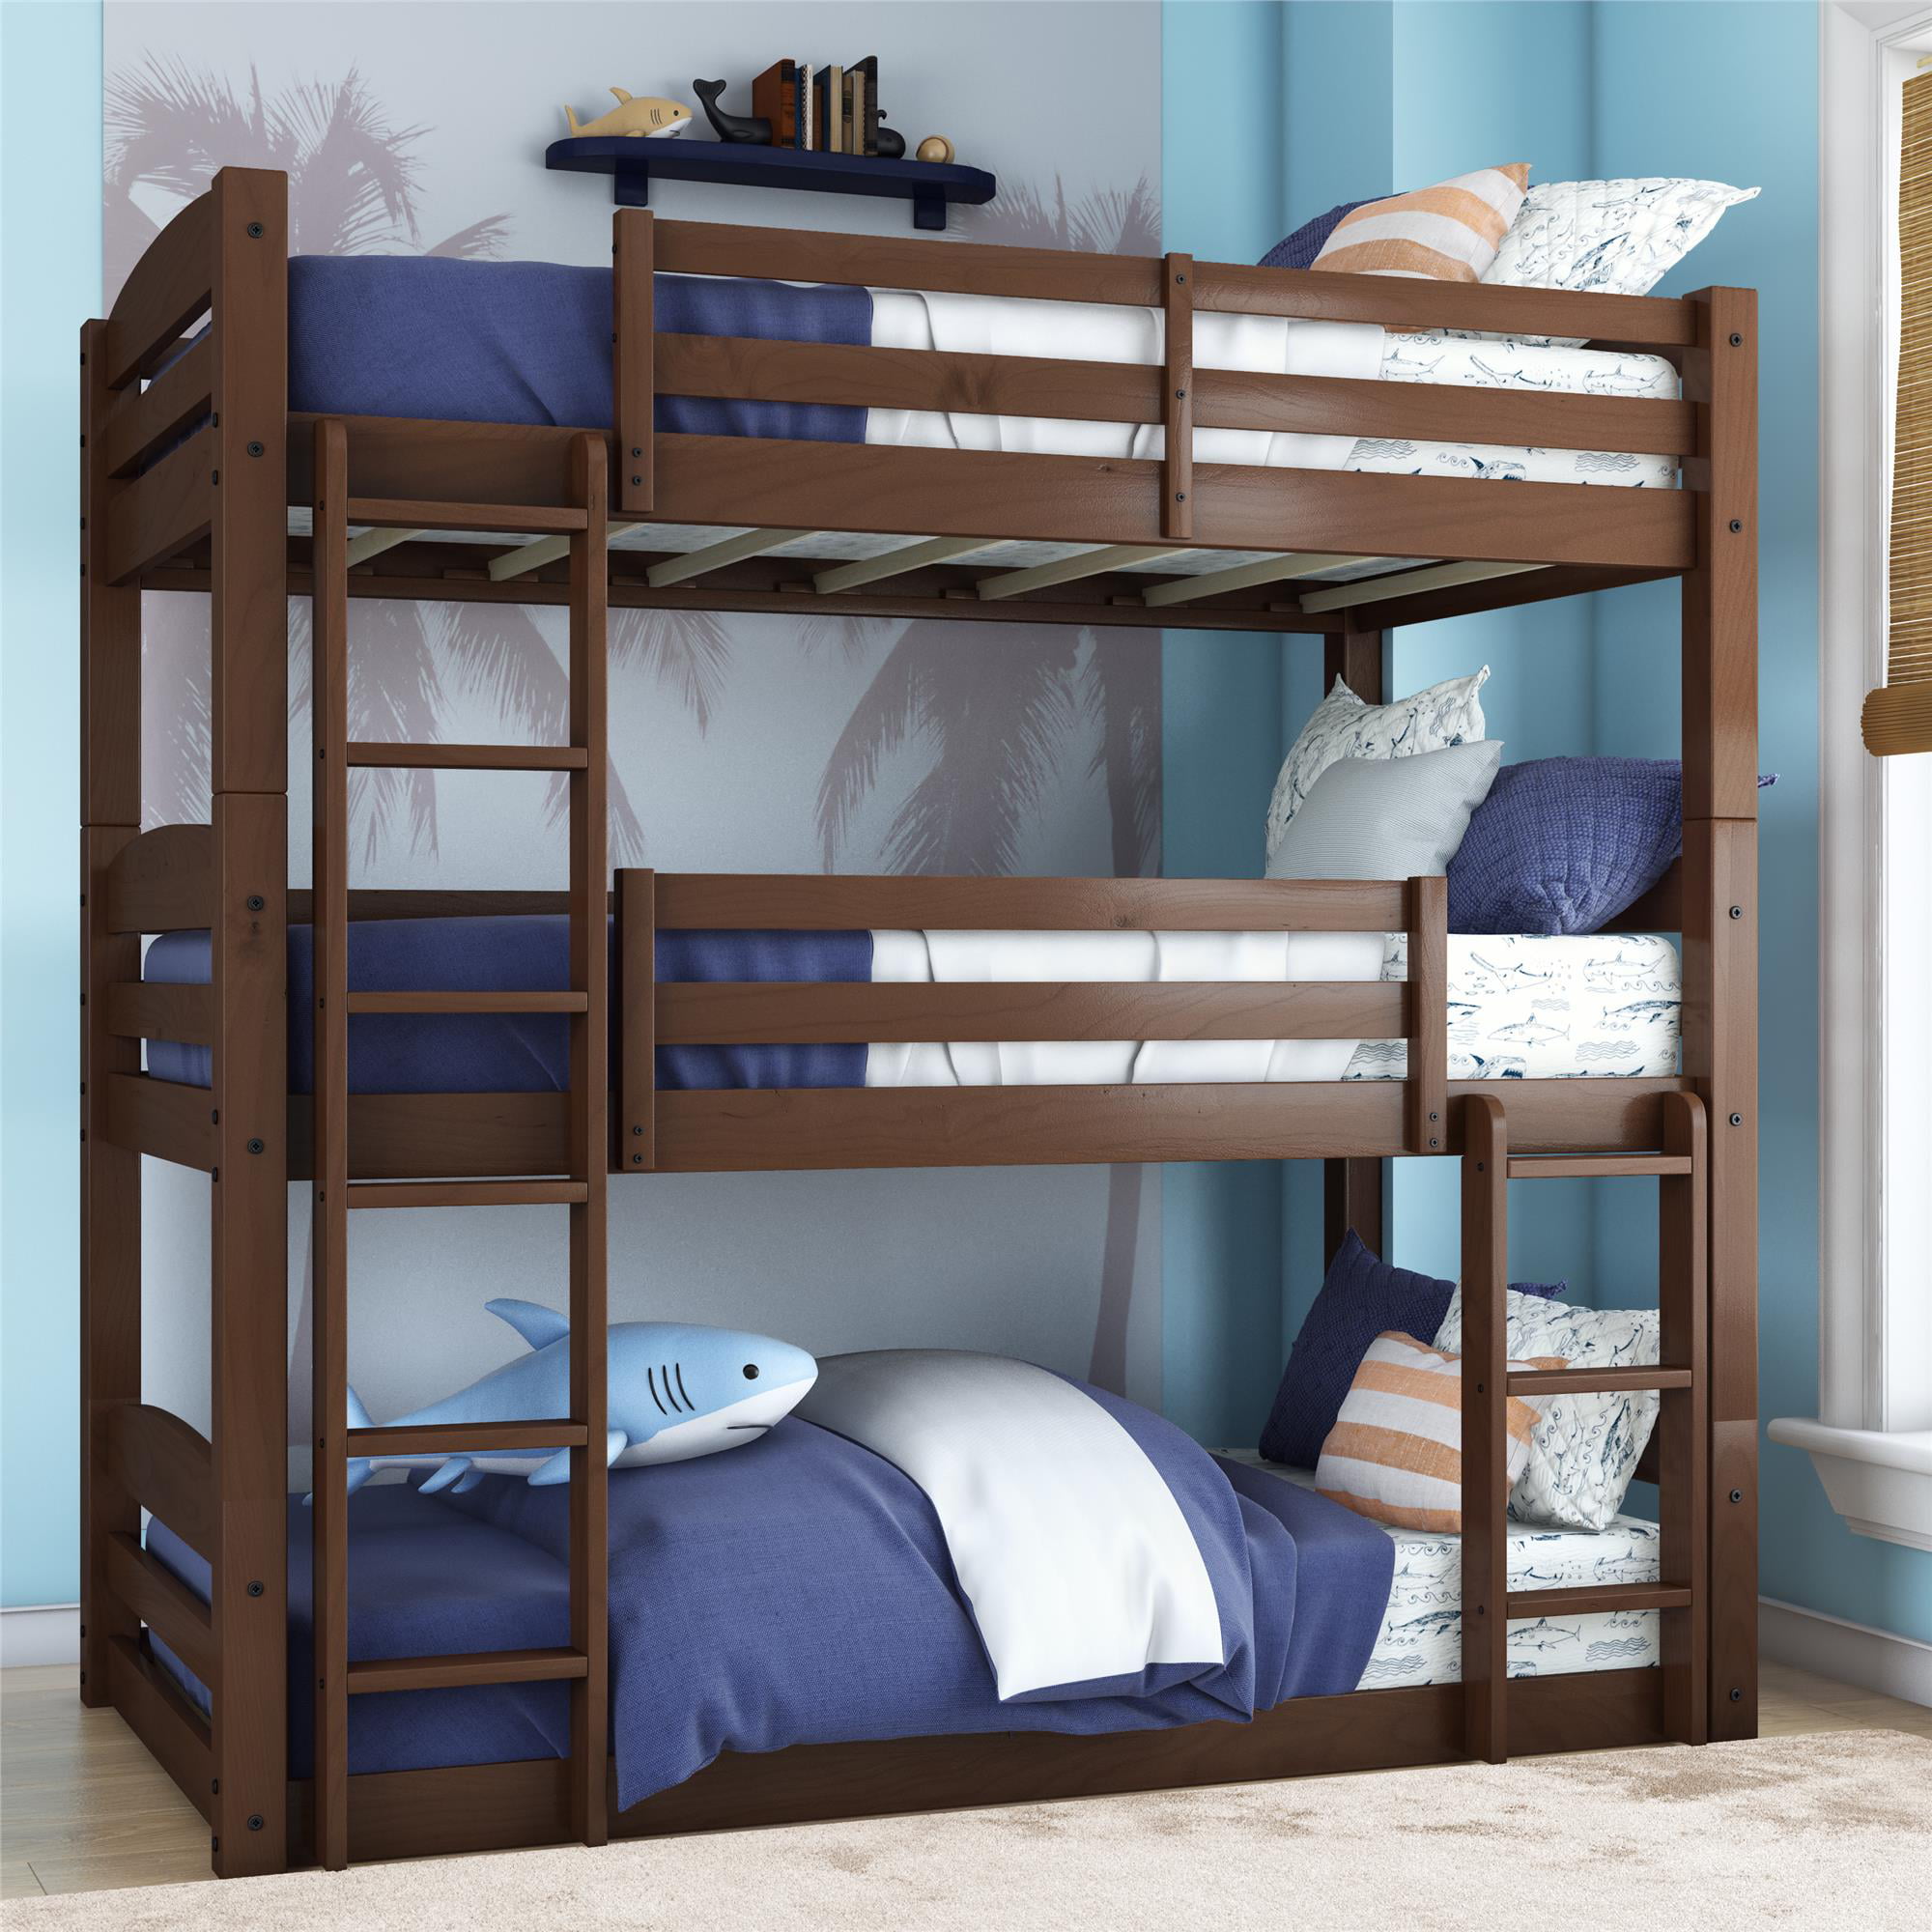 Better Homes And Gardens Tristan Wooden, What Age Is A Bunk Bed Safe